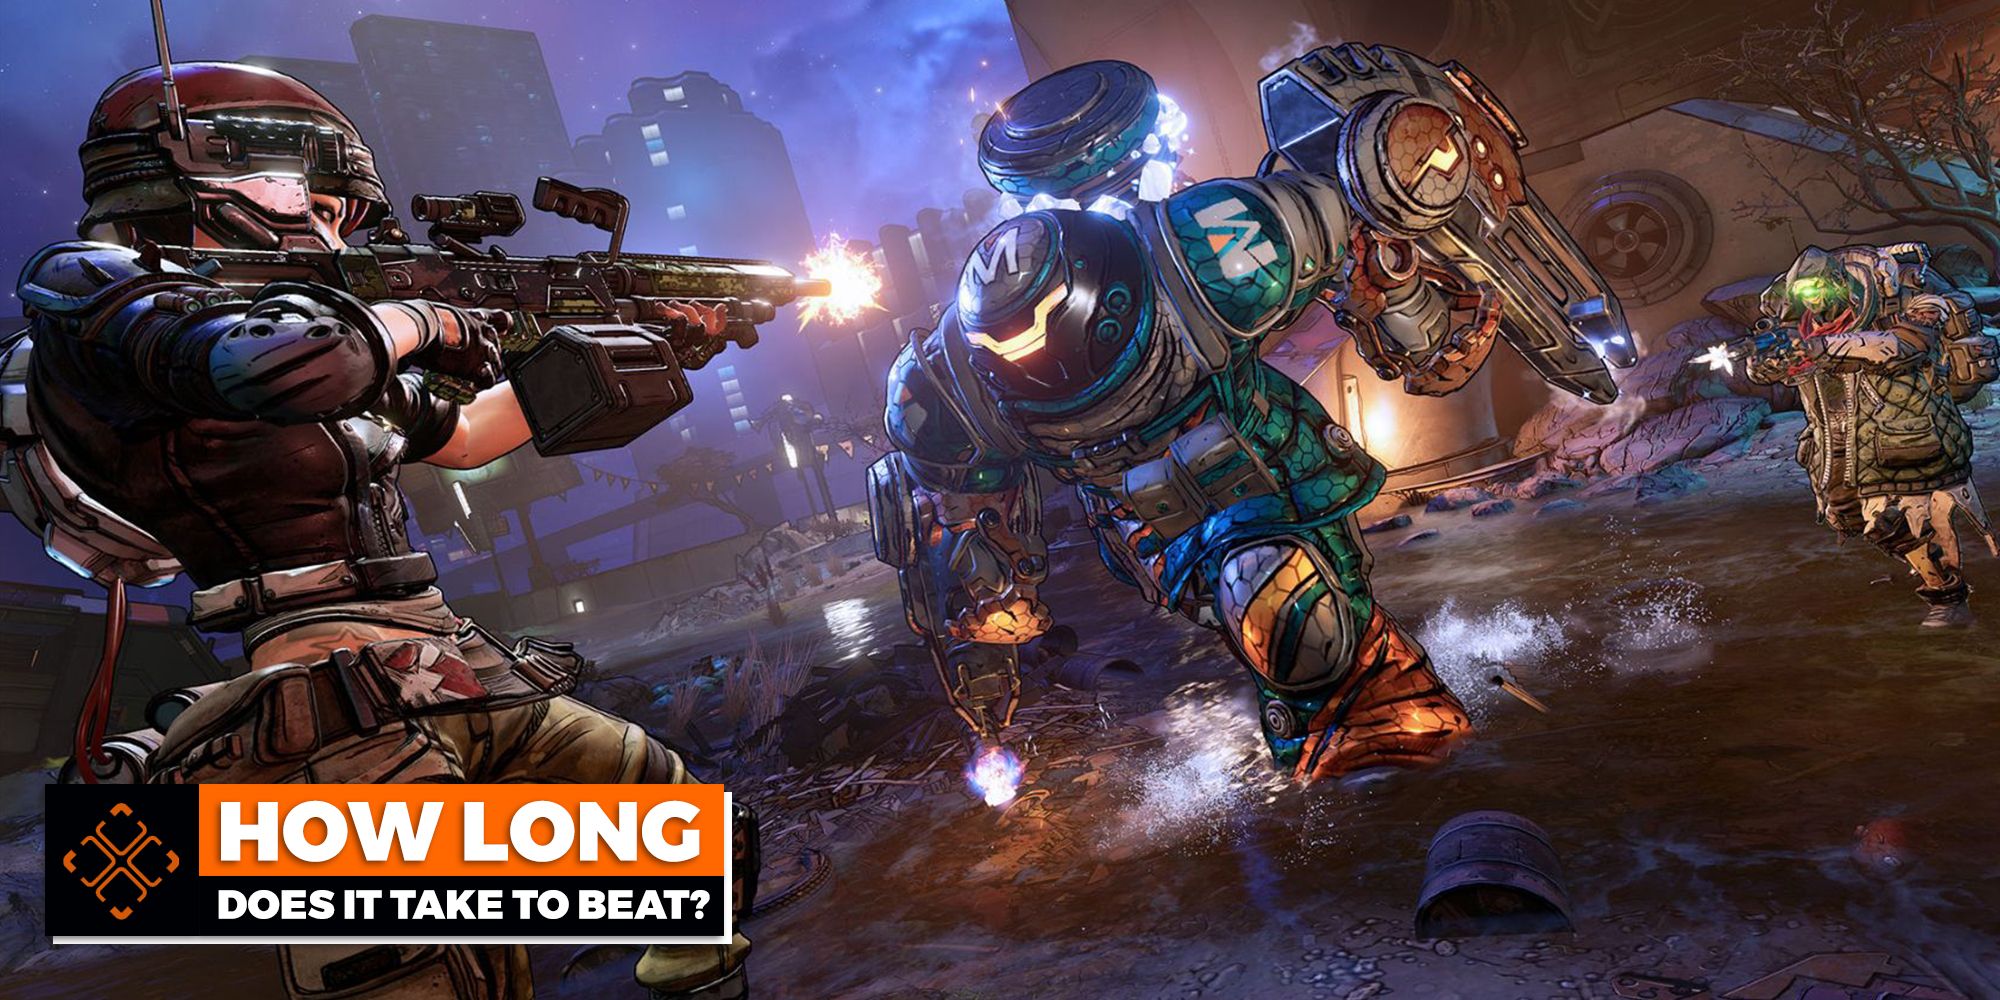 Game image from Borderlands 3.